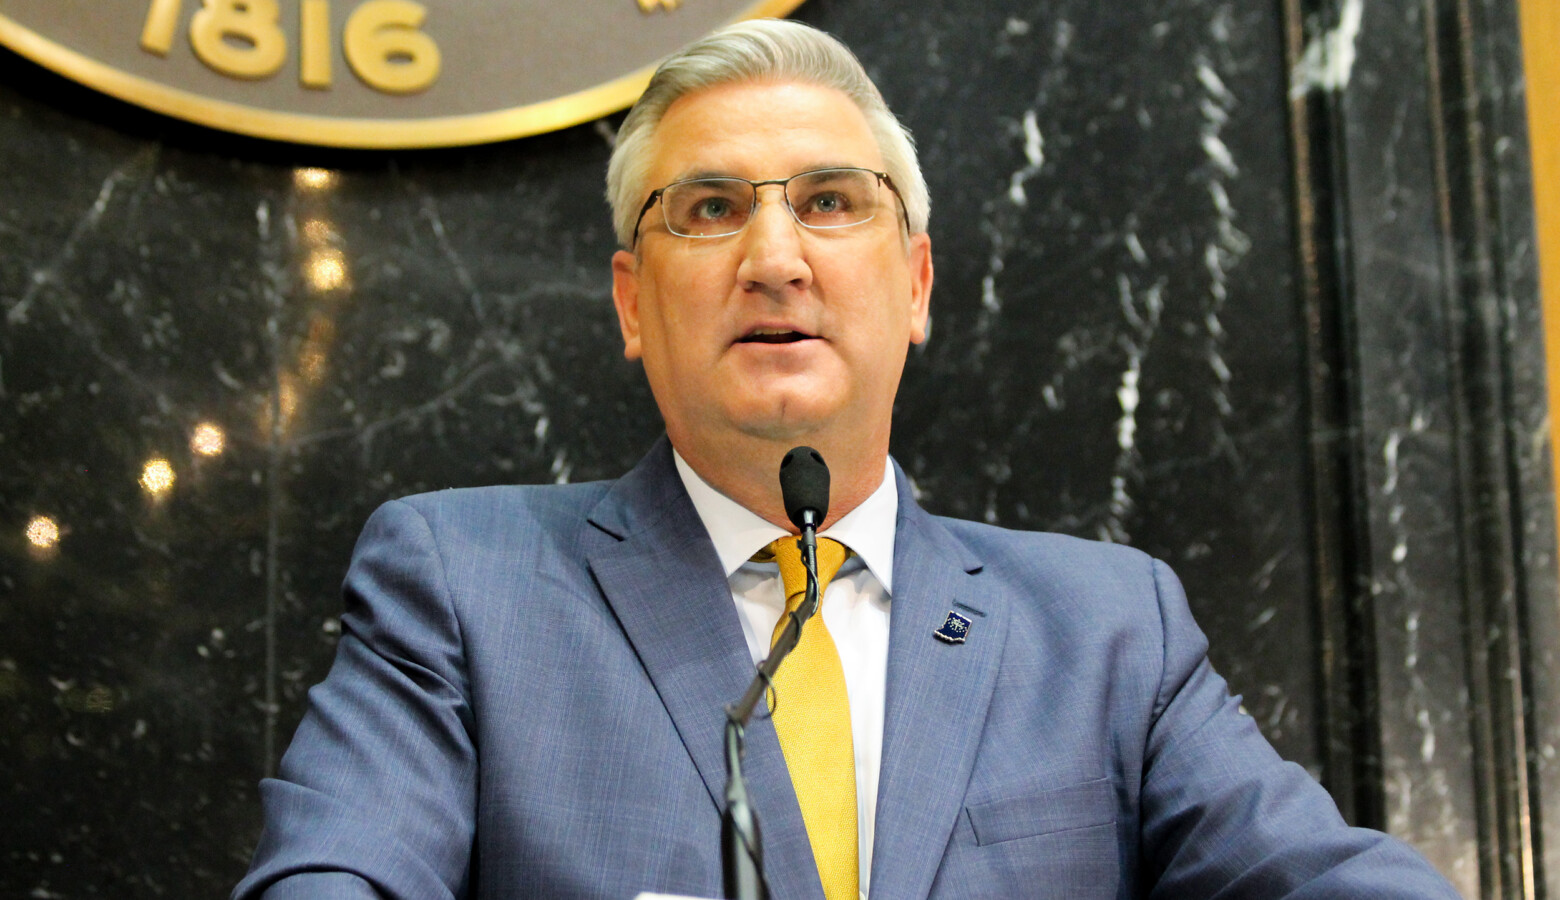 Gov. Eric Holcomb has used his emergency powers extensively in 2020 throughout the COVID-19 pandemic. (Lauren Chapman/IPB News)